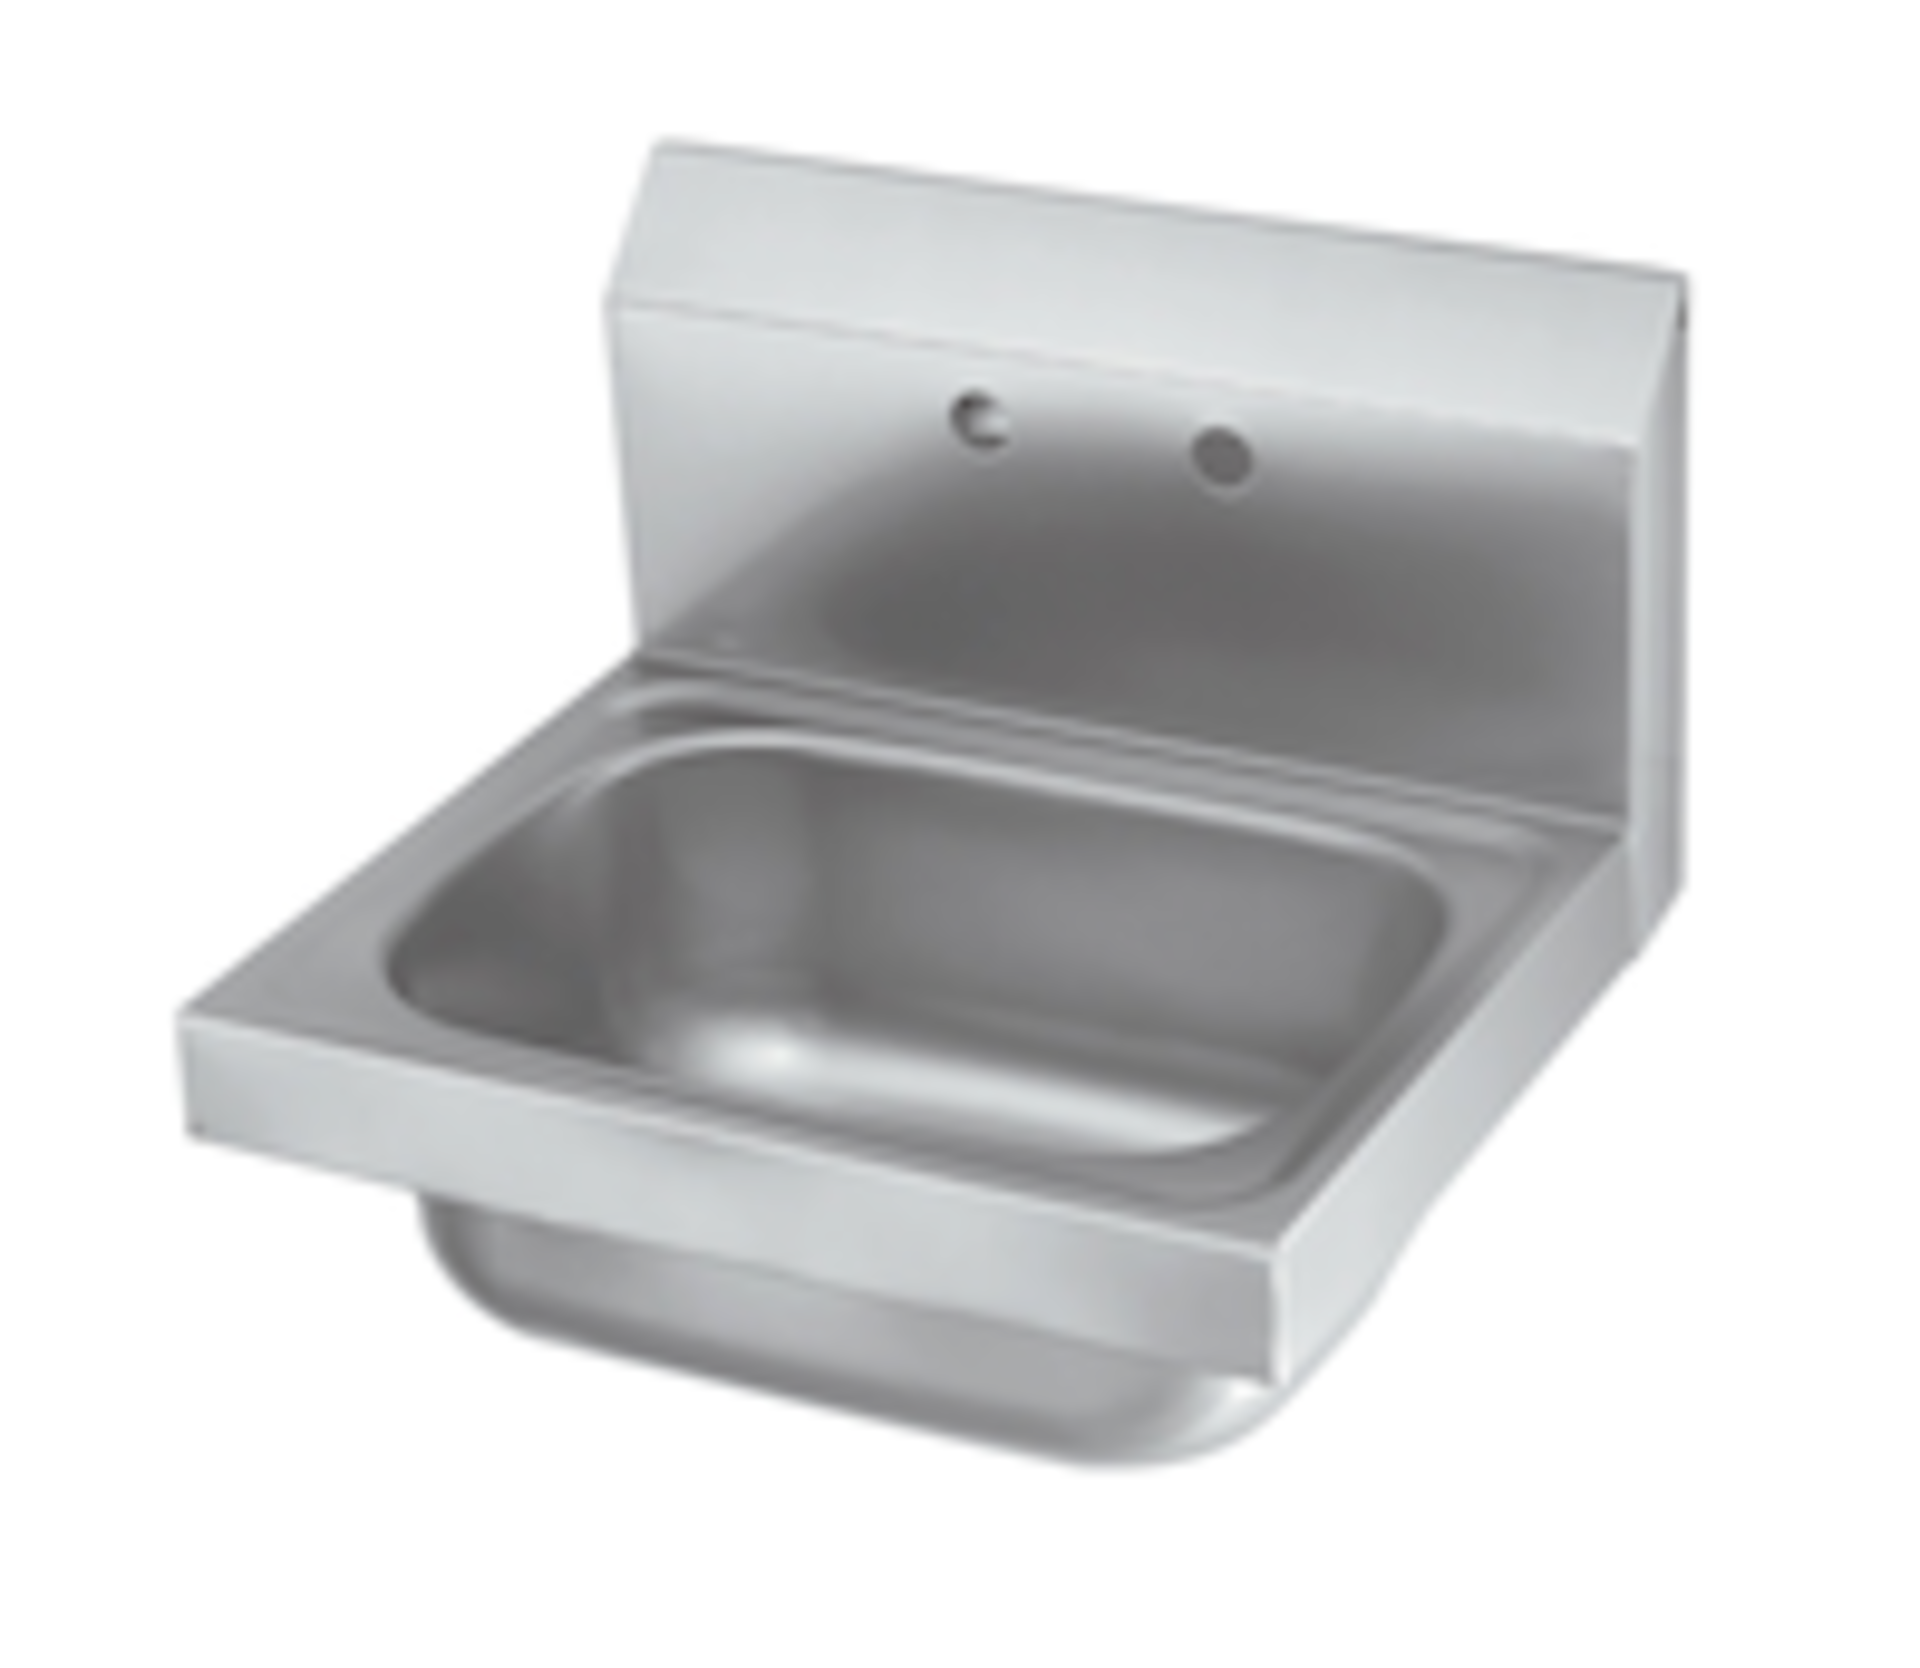 20GA.304S/S hand sink with 12-3/4*10*5 drawing bowl 18GA.304S/S wall mounted clip included 1.5"